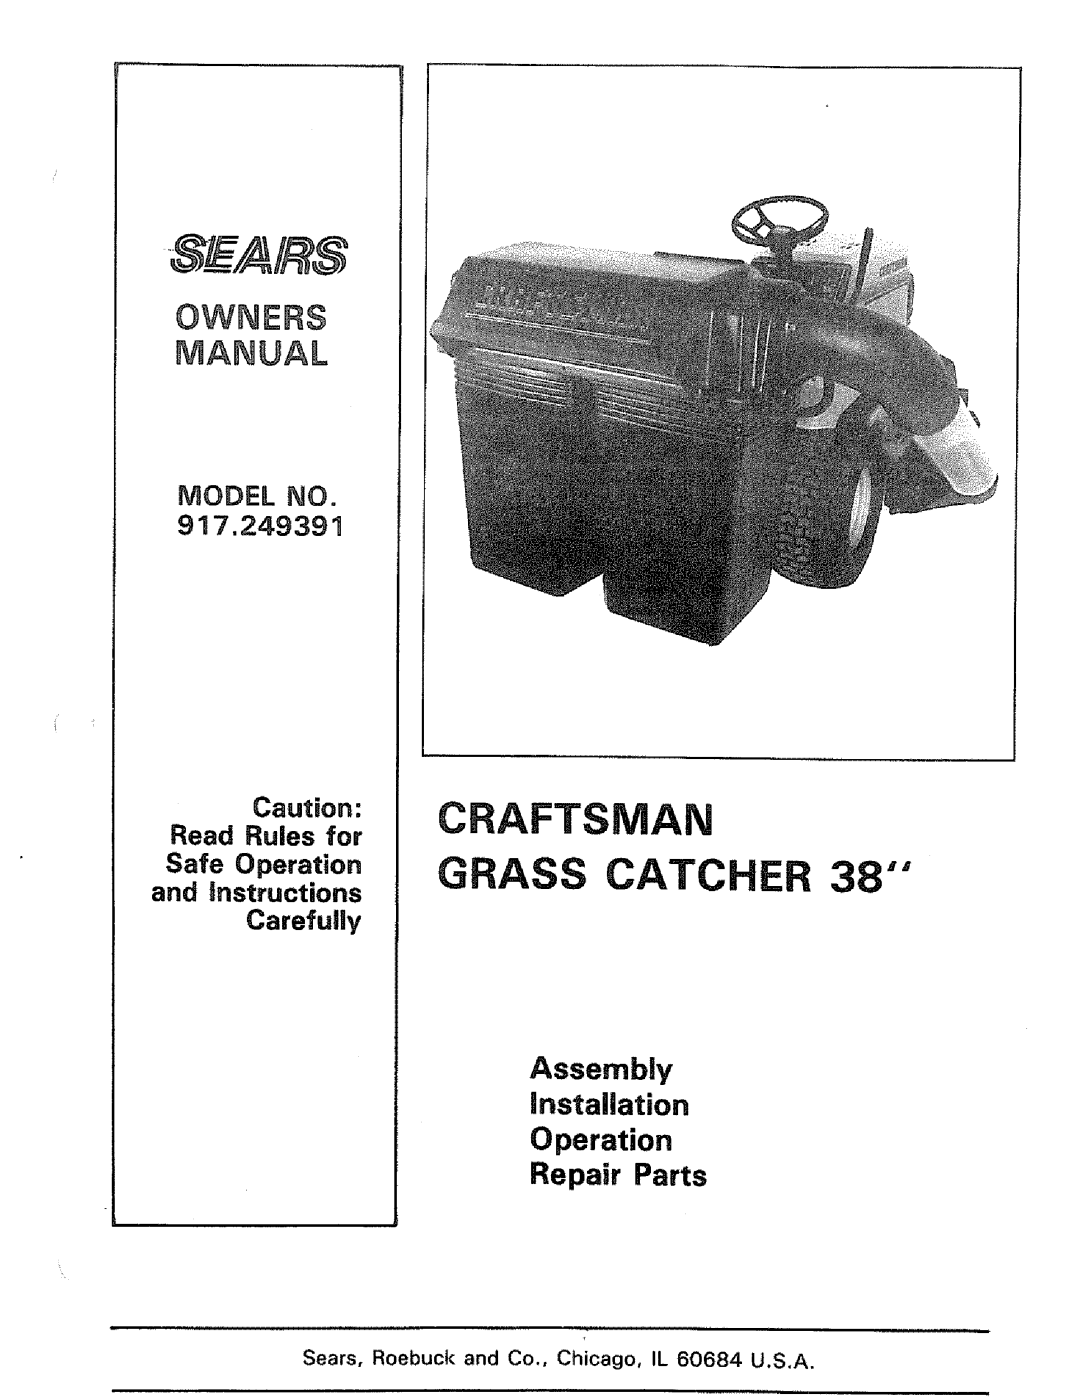 Sears 917.249391 manual Owners Manual, Model No, Caution: Read Rules for, Safe Operation and instructions Carefully 